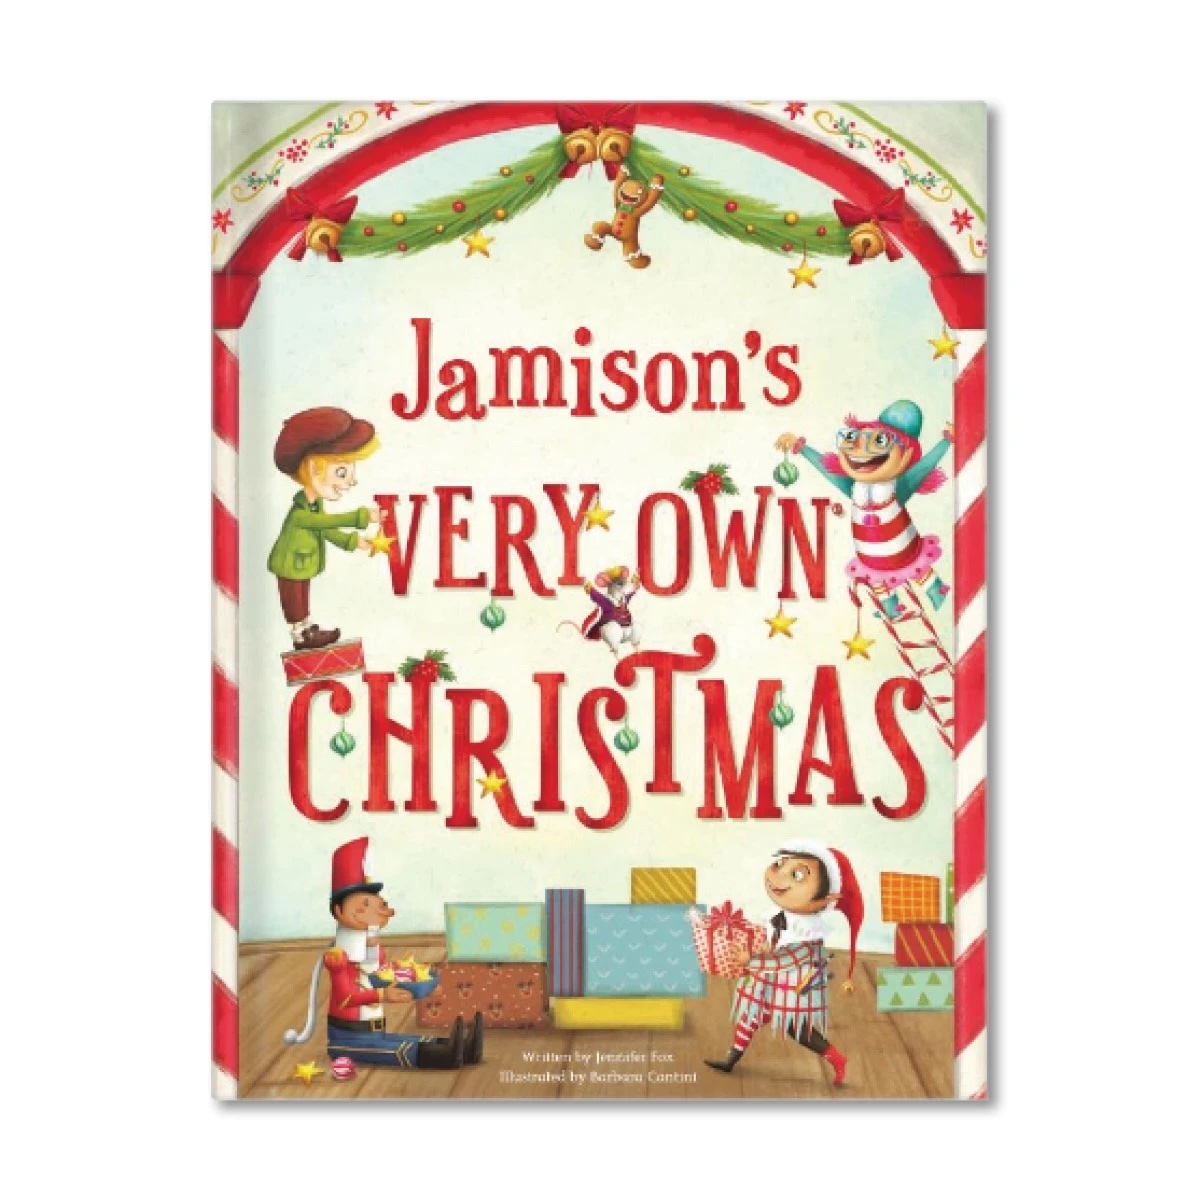 Pesronalized Christmas Book By IseeMe Books. A colorful book personalized with child's name Jamison whose title is Jamison's Very Own Christmas